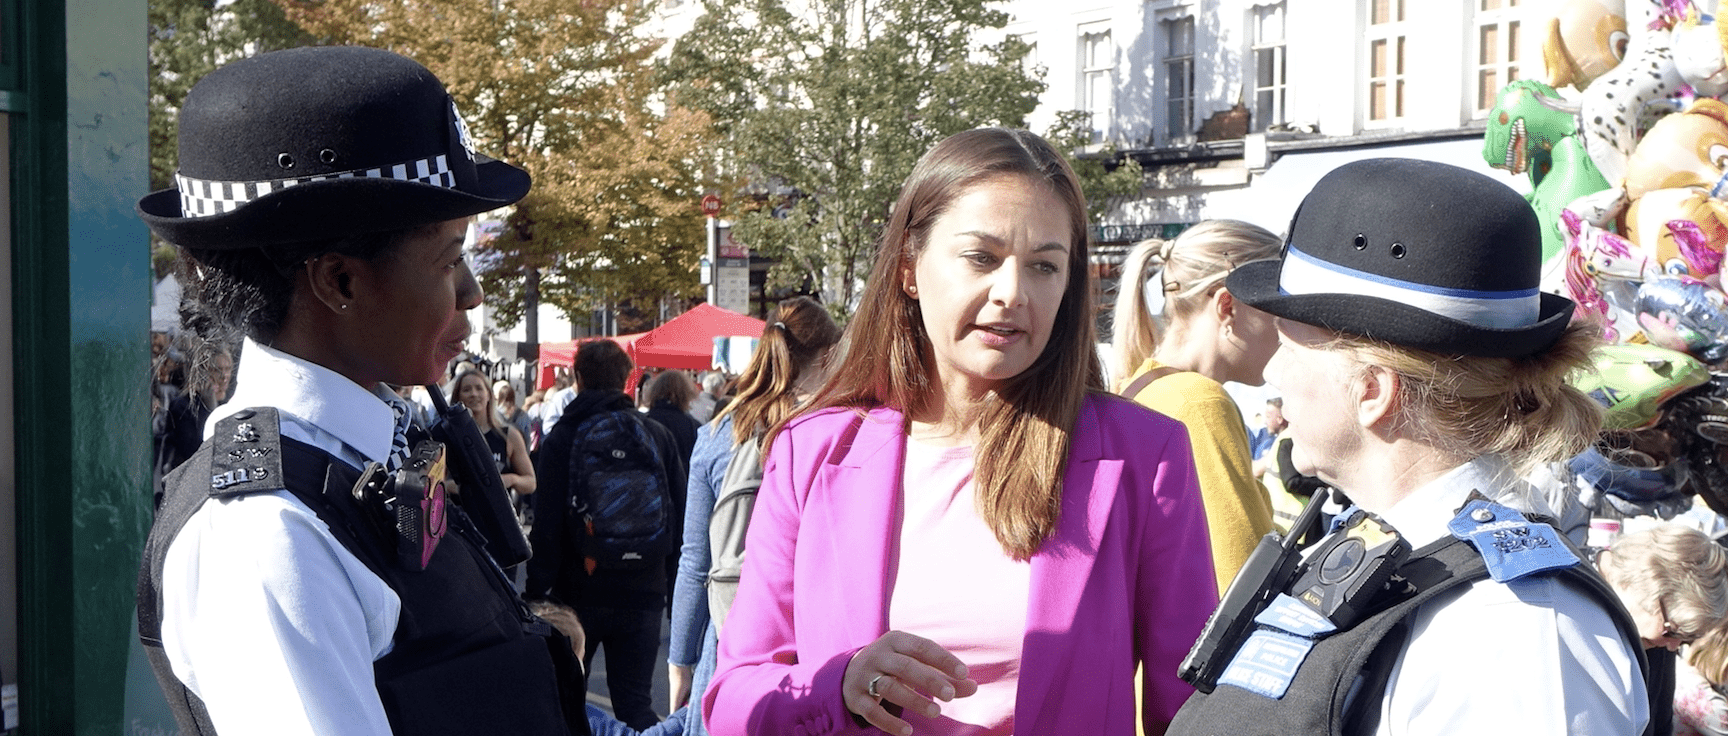 Siobhan Benita: The Lib Dem candidate for London mayor with a plan to tackle knife crime